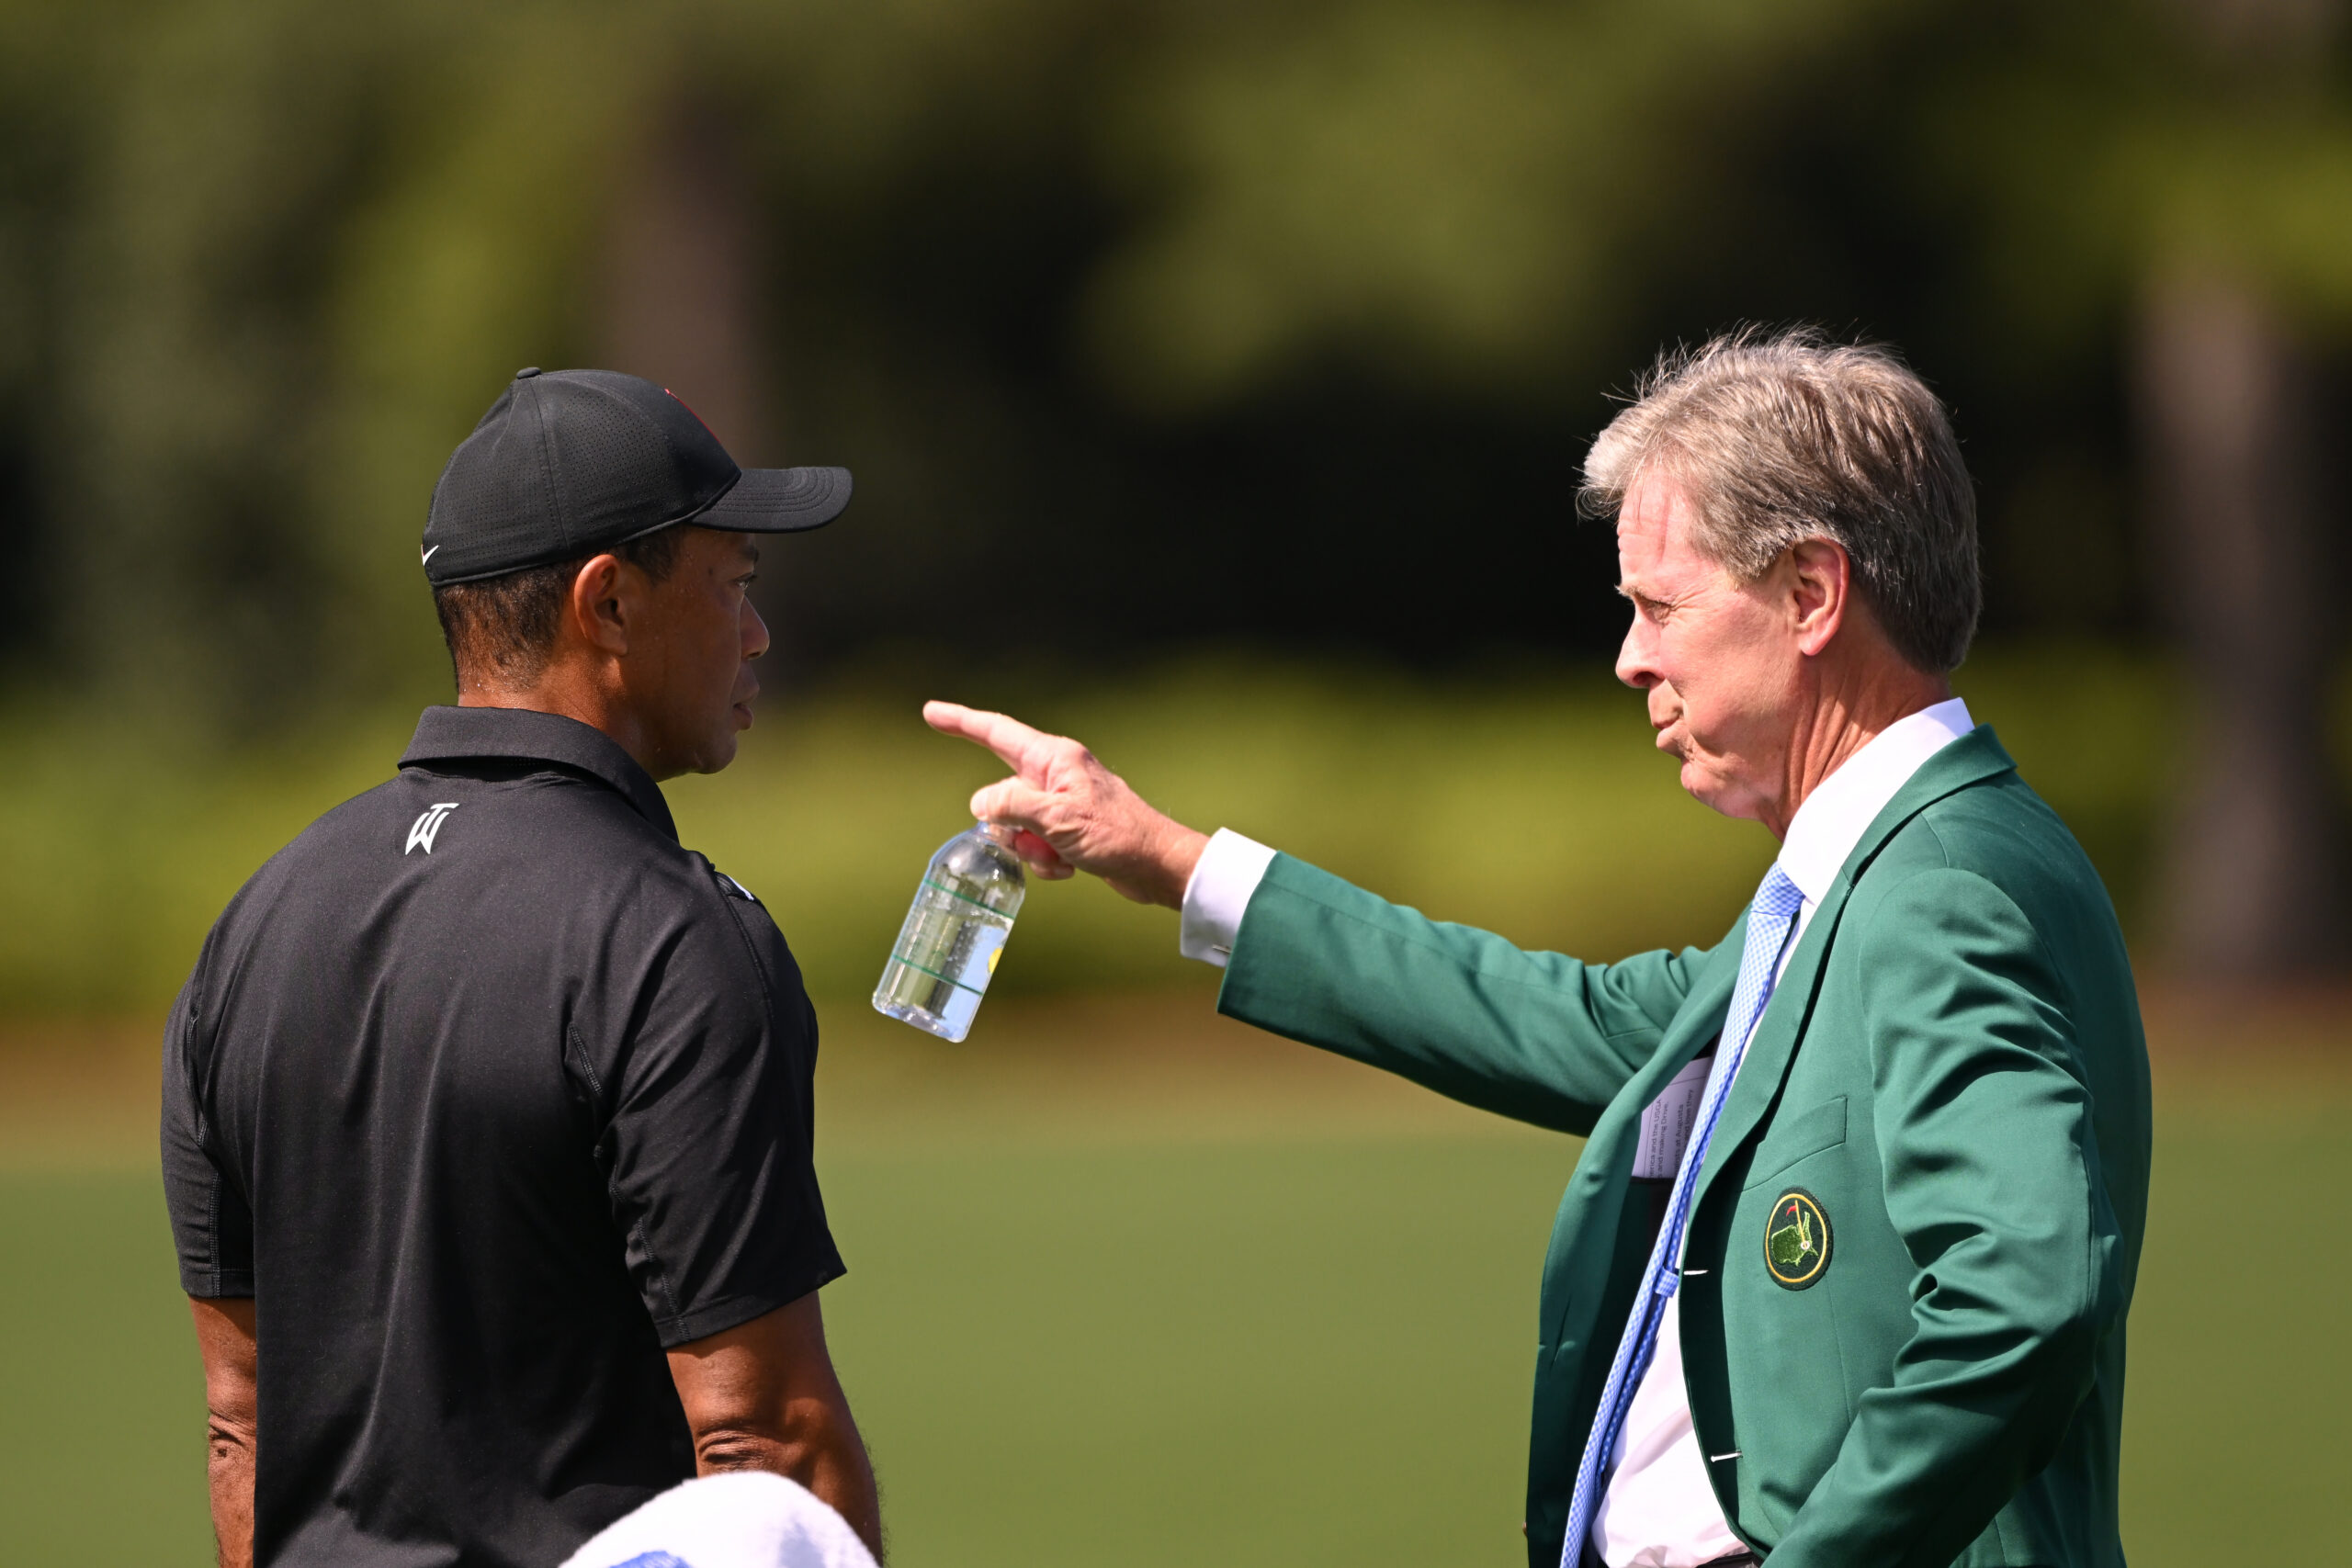 Lynch: Three weeks into a war for golf’s future, Augusta National’s Fred Ridley ended it with one shot